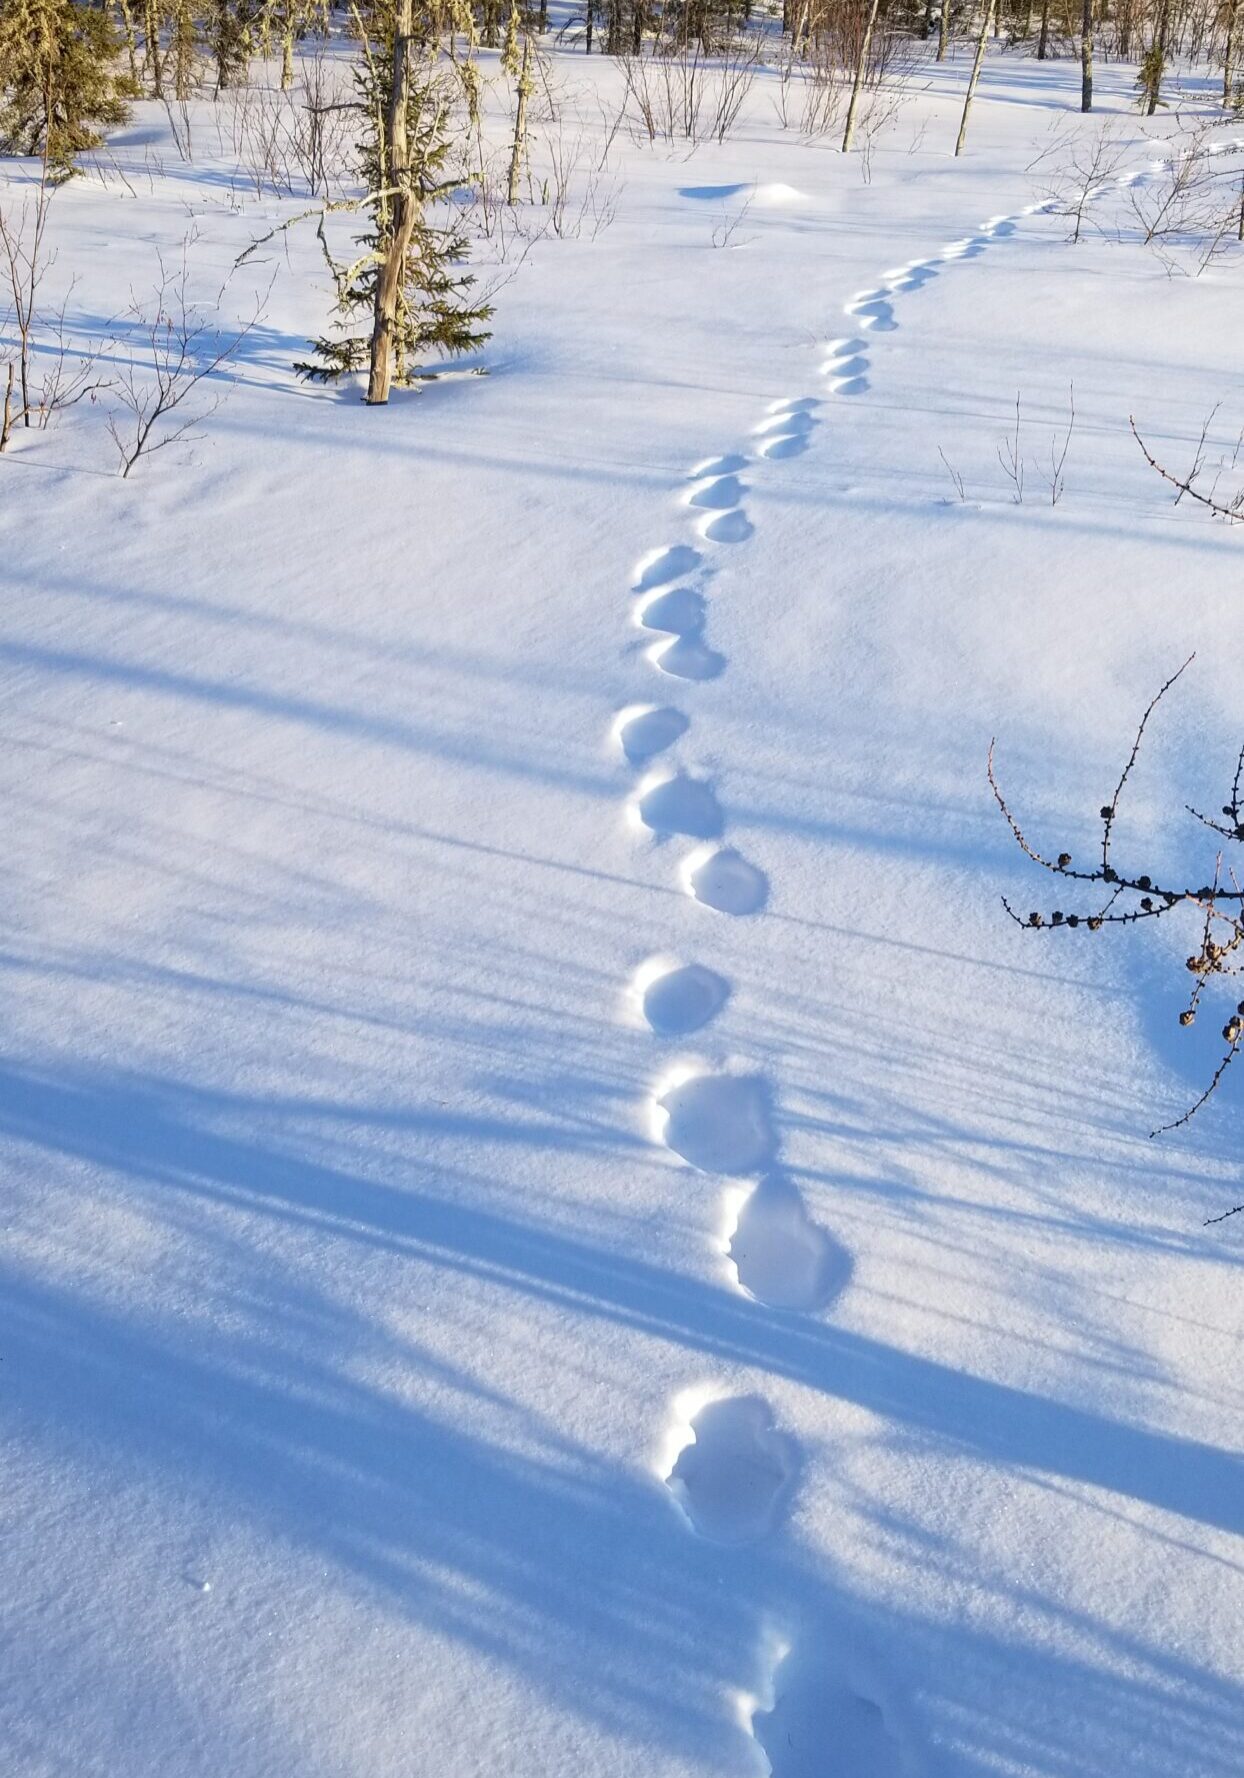 A photo of animal tracks walking in the snow.